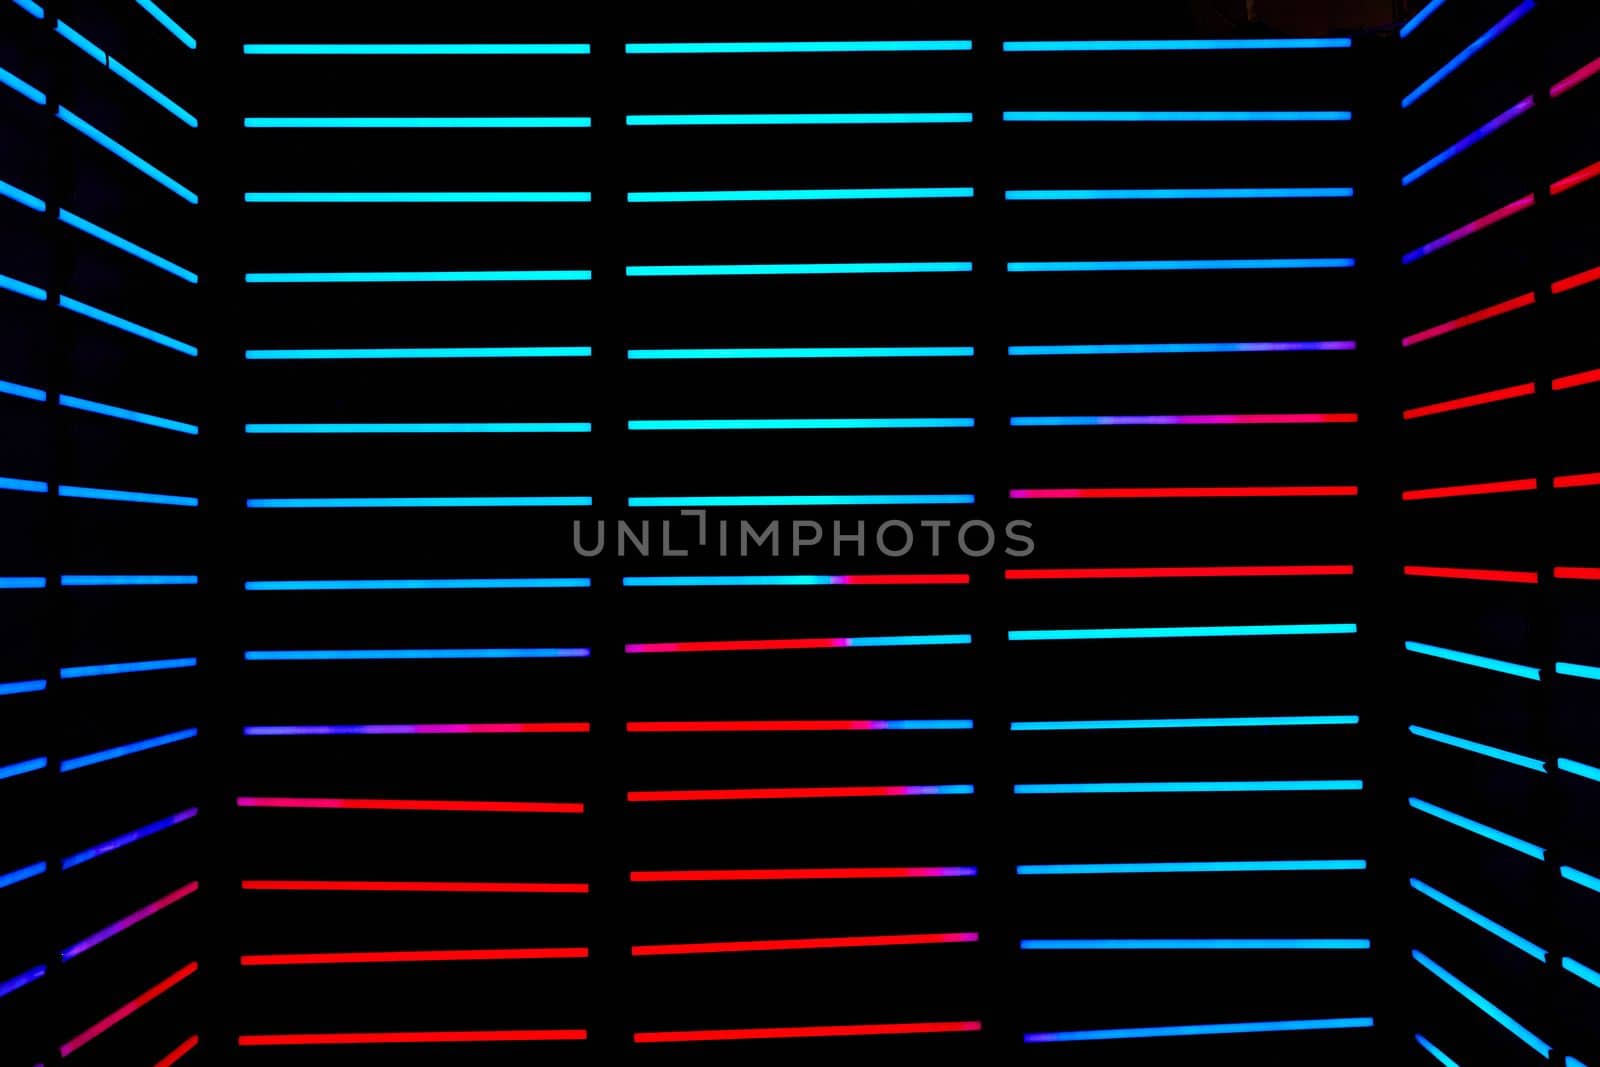 Image of Abstract dark room with horizontal LED poles in blue and red